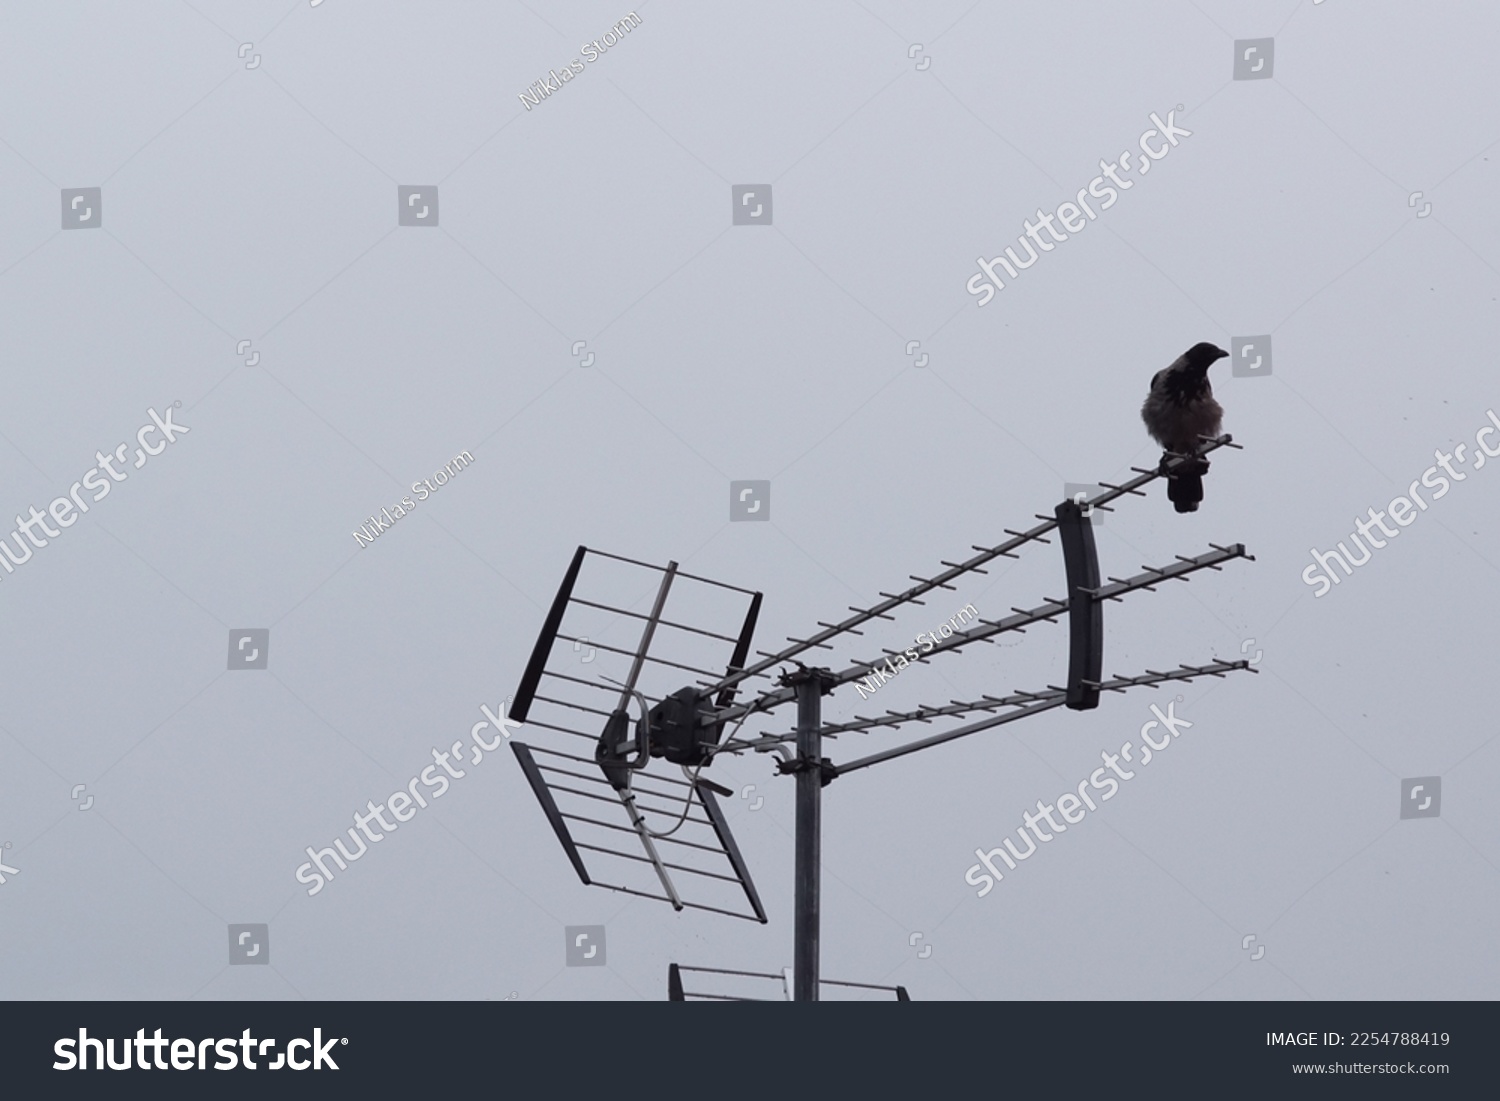 Low angle view of bird perching on antenna against clear sky #2254788419